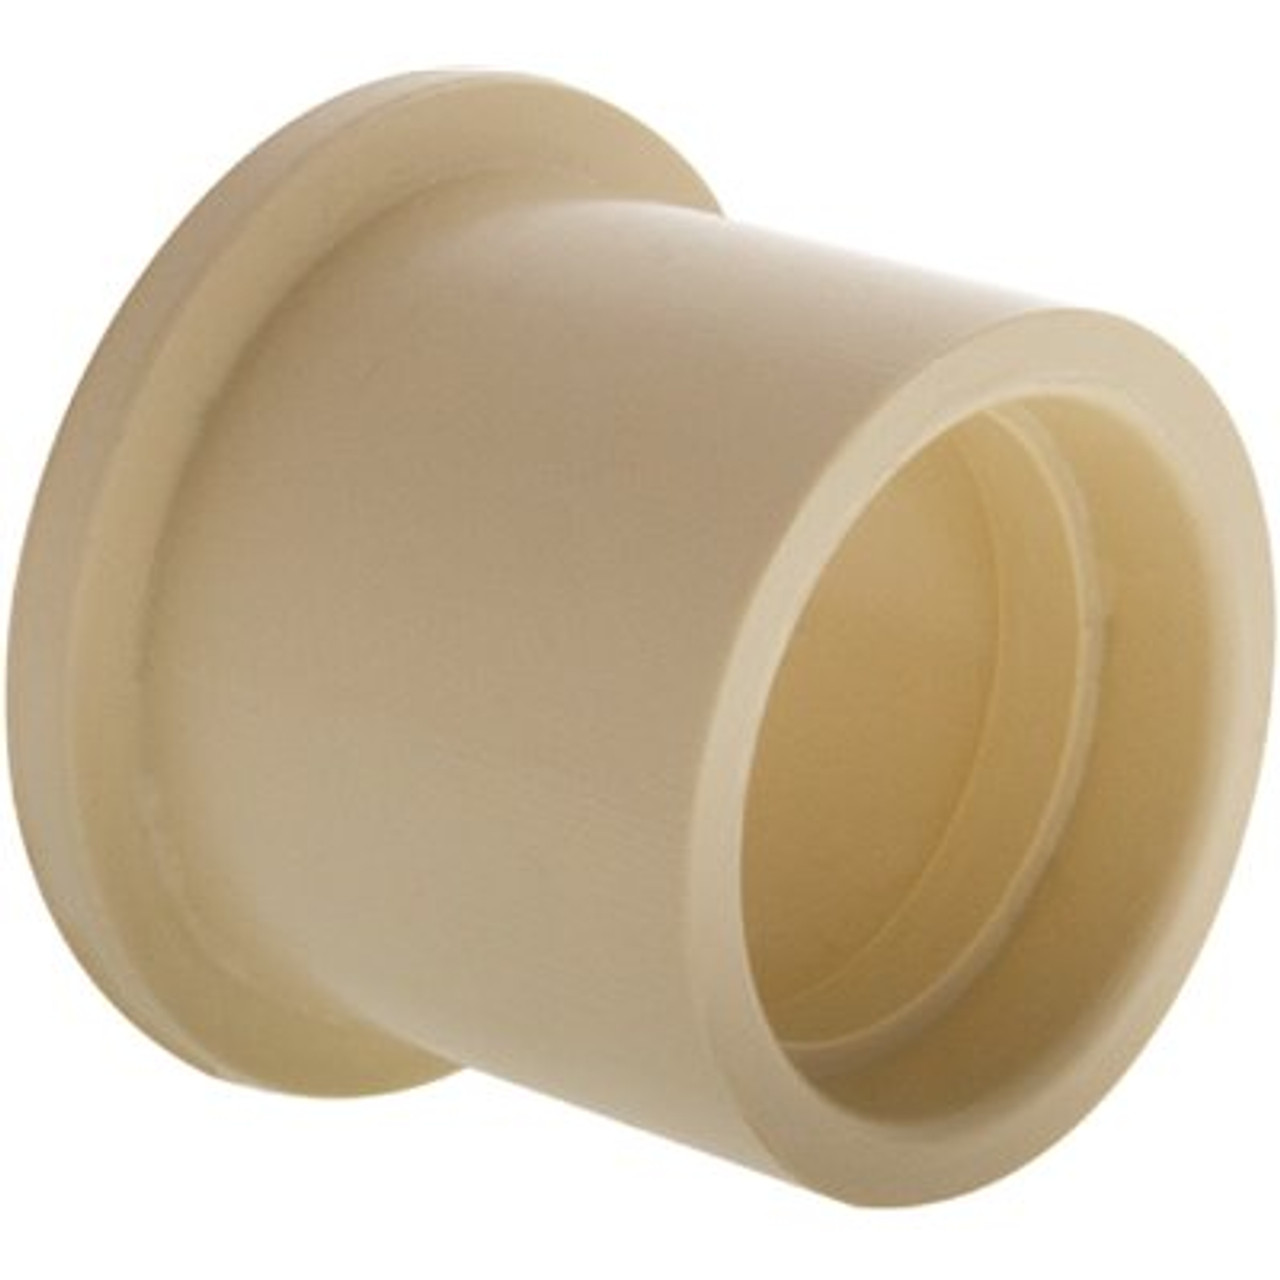 NIBCO 1 in. x 3/4 in. CPVC-CTS Slip x Slip Reducer Coupling Fitting